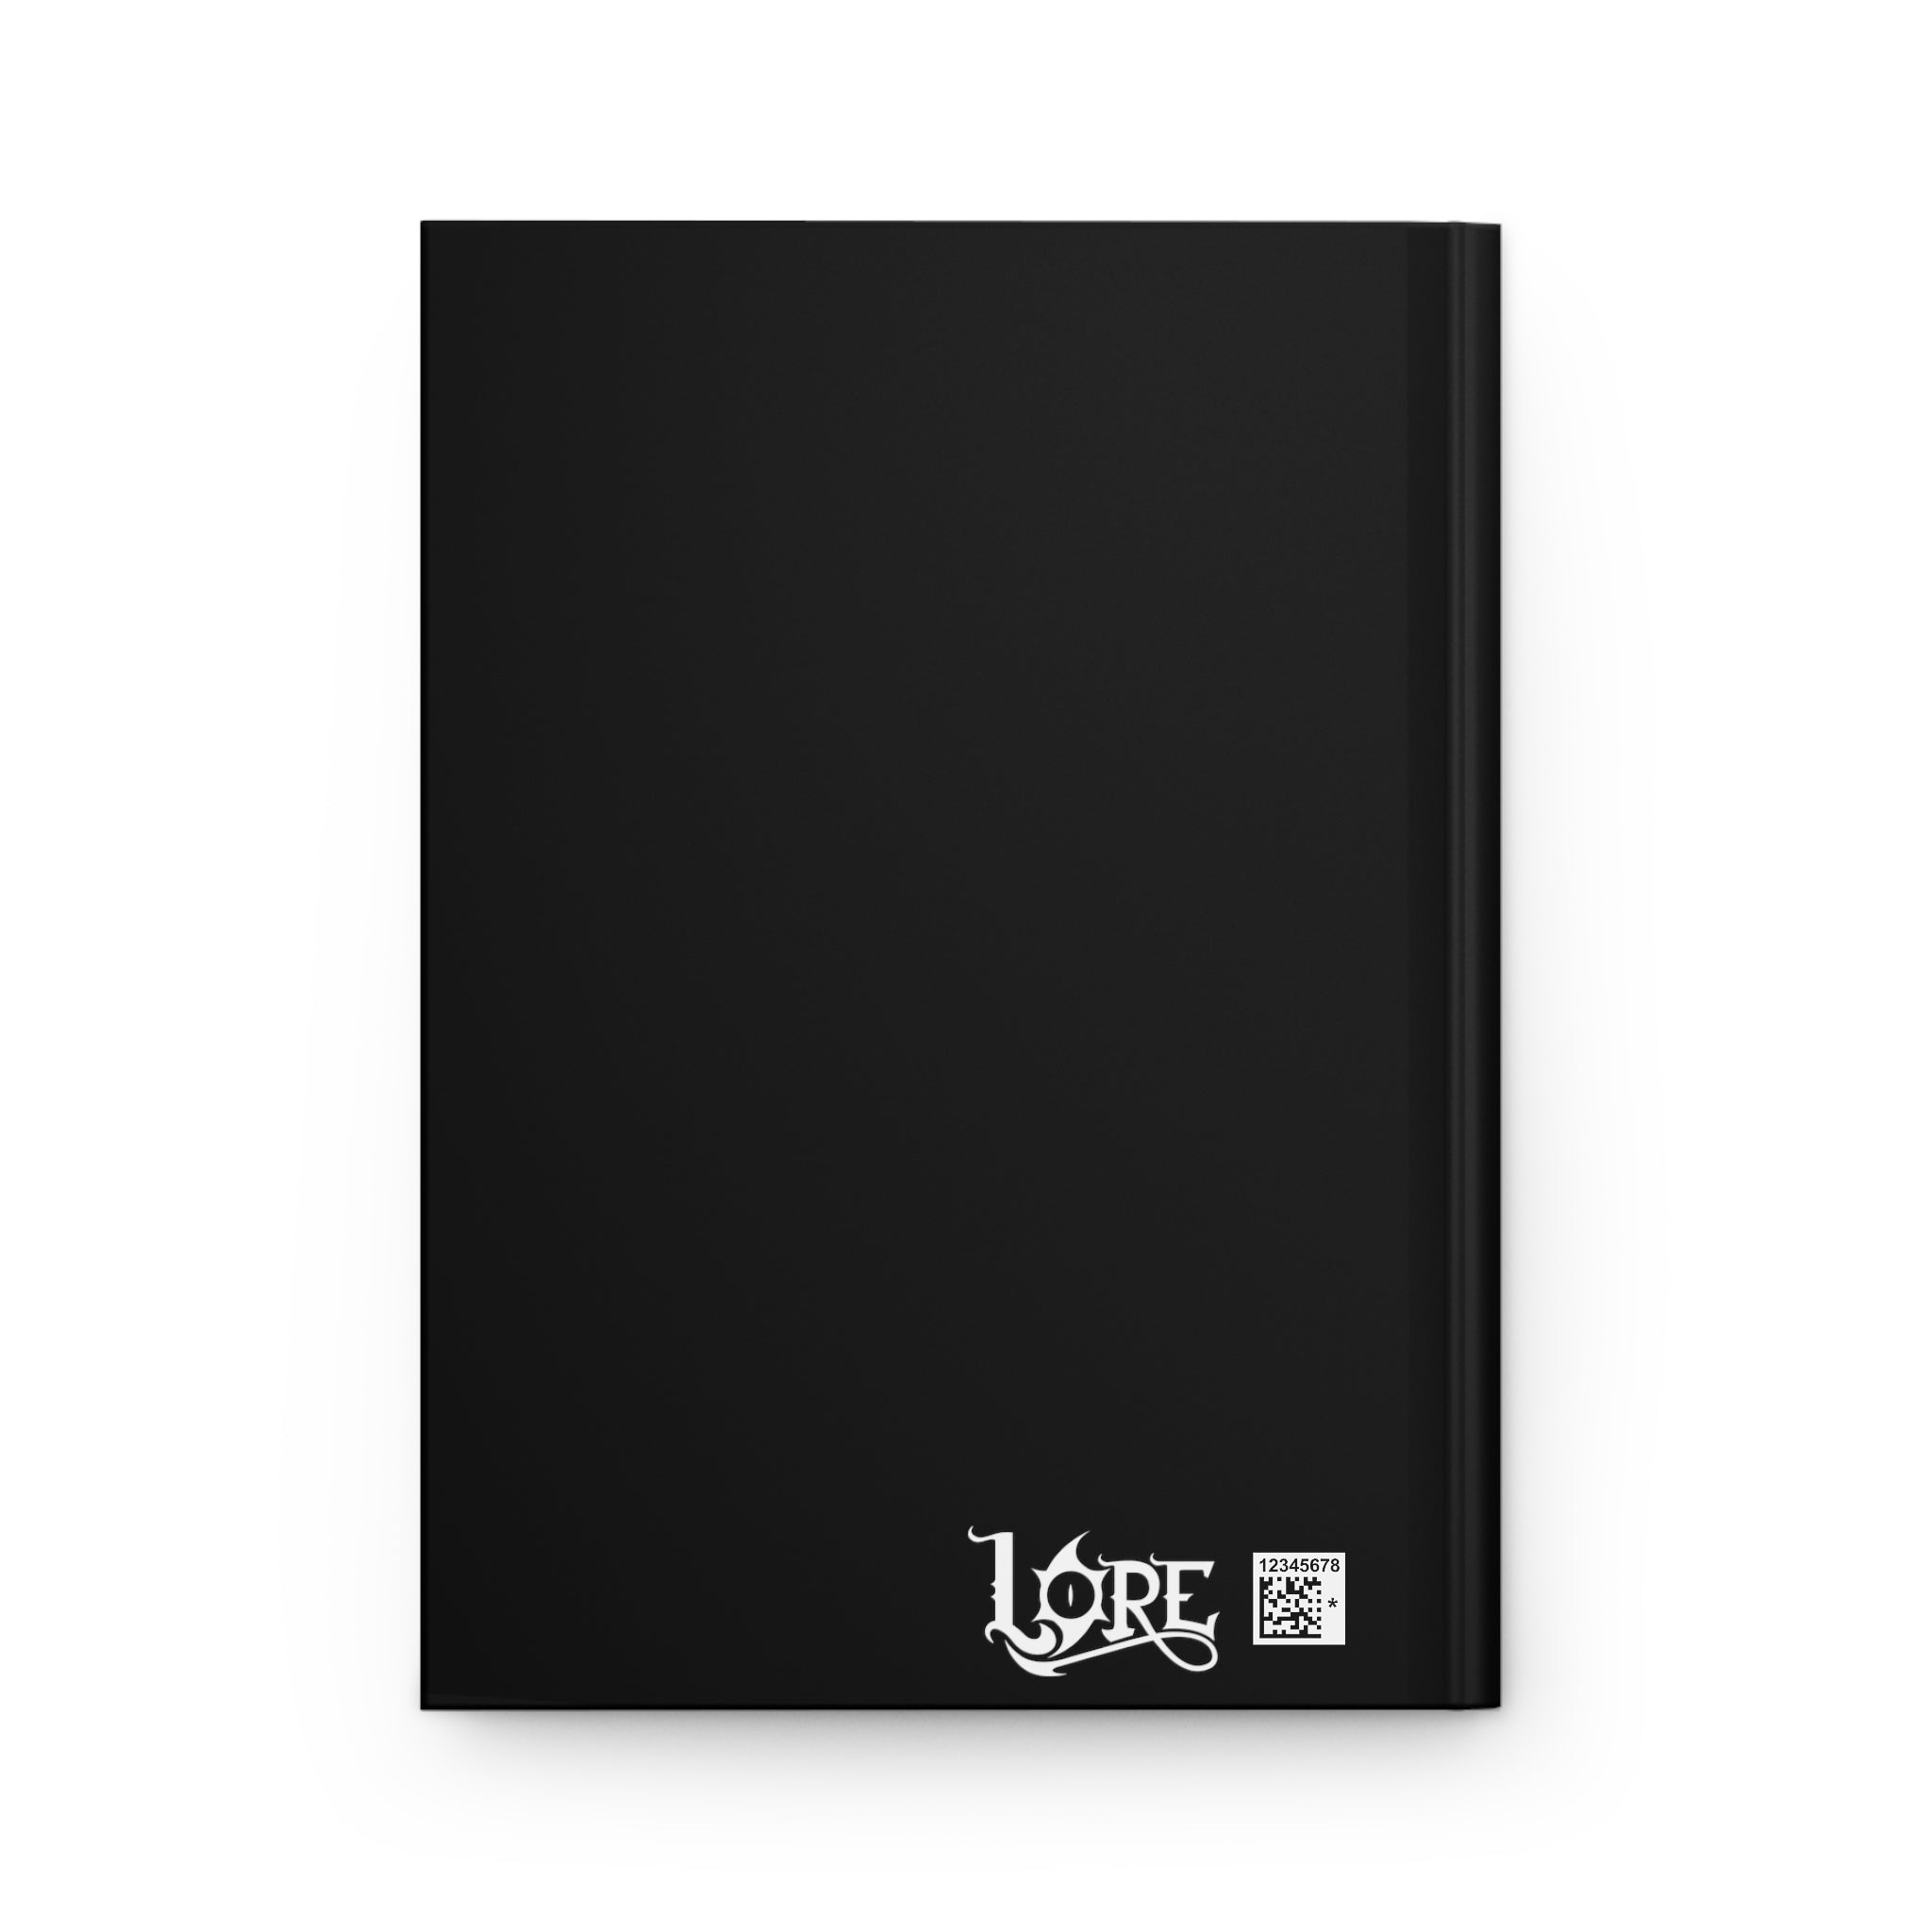 ROGUE CLASS SILHOUETTE HARDCOVER CAMPAIGN JOURNAL